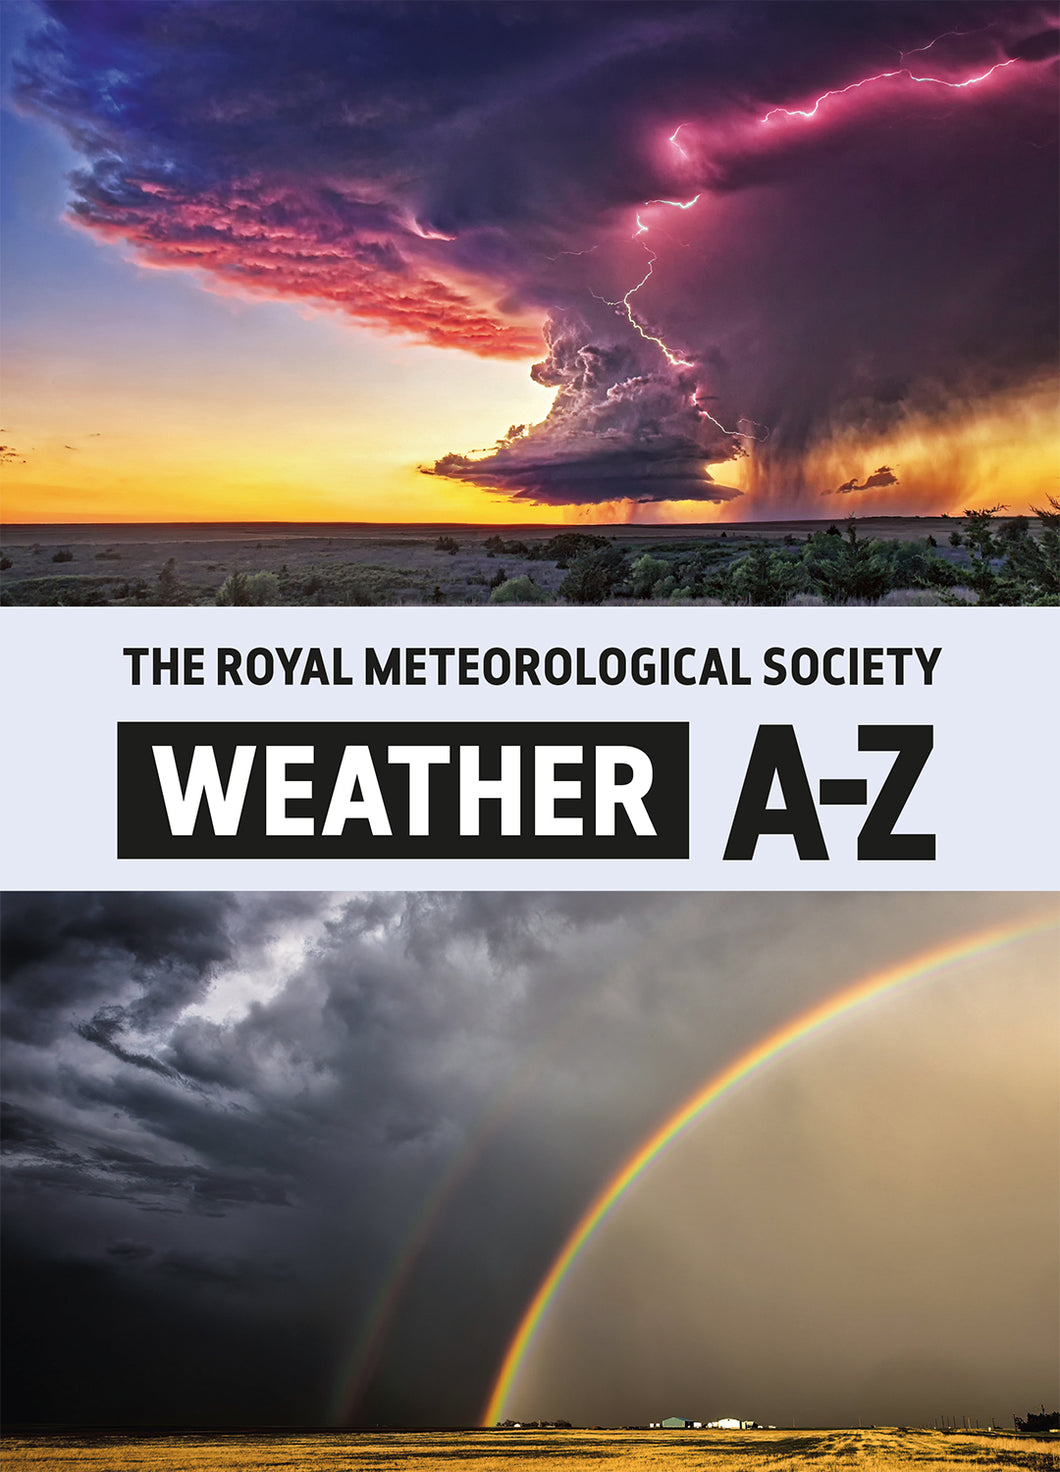 The Royal Meteorological Society: Weather A-Z